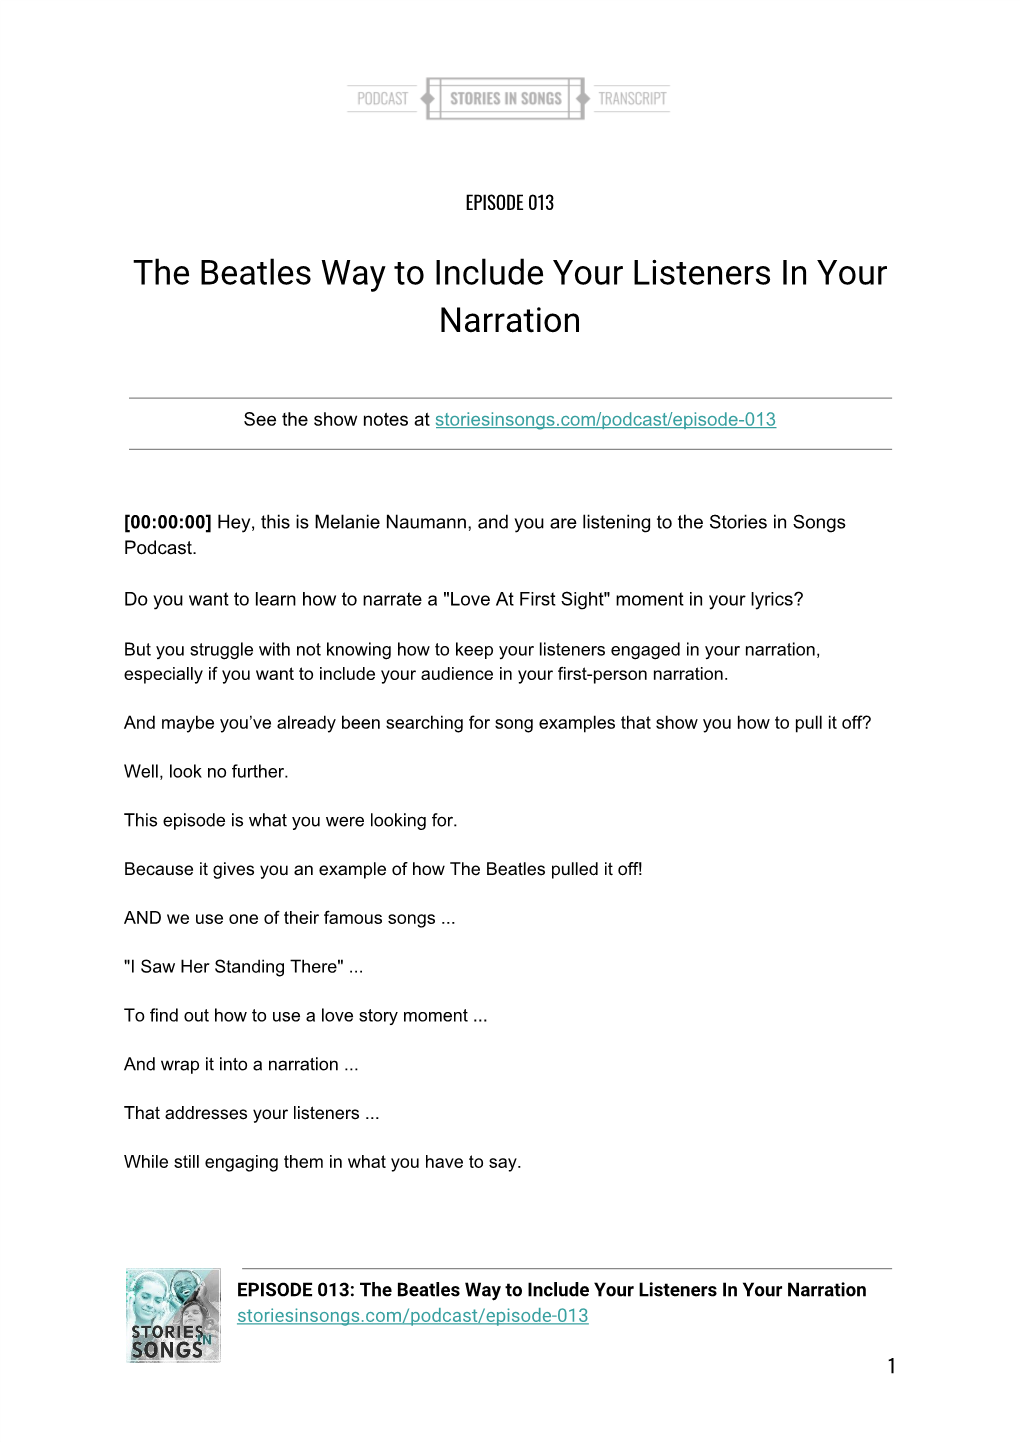 The Beatles Way to Include Your Listeners in Your Narration